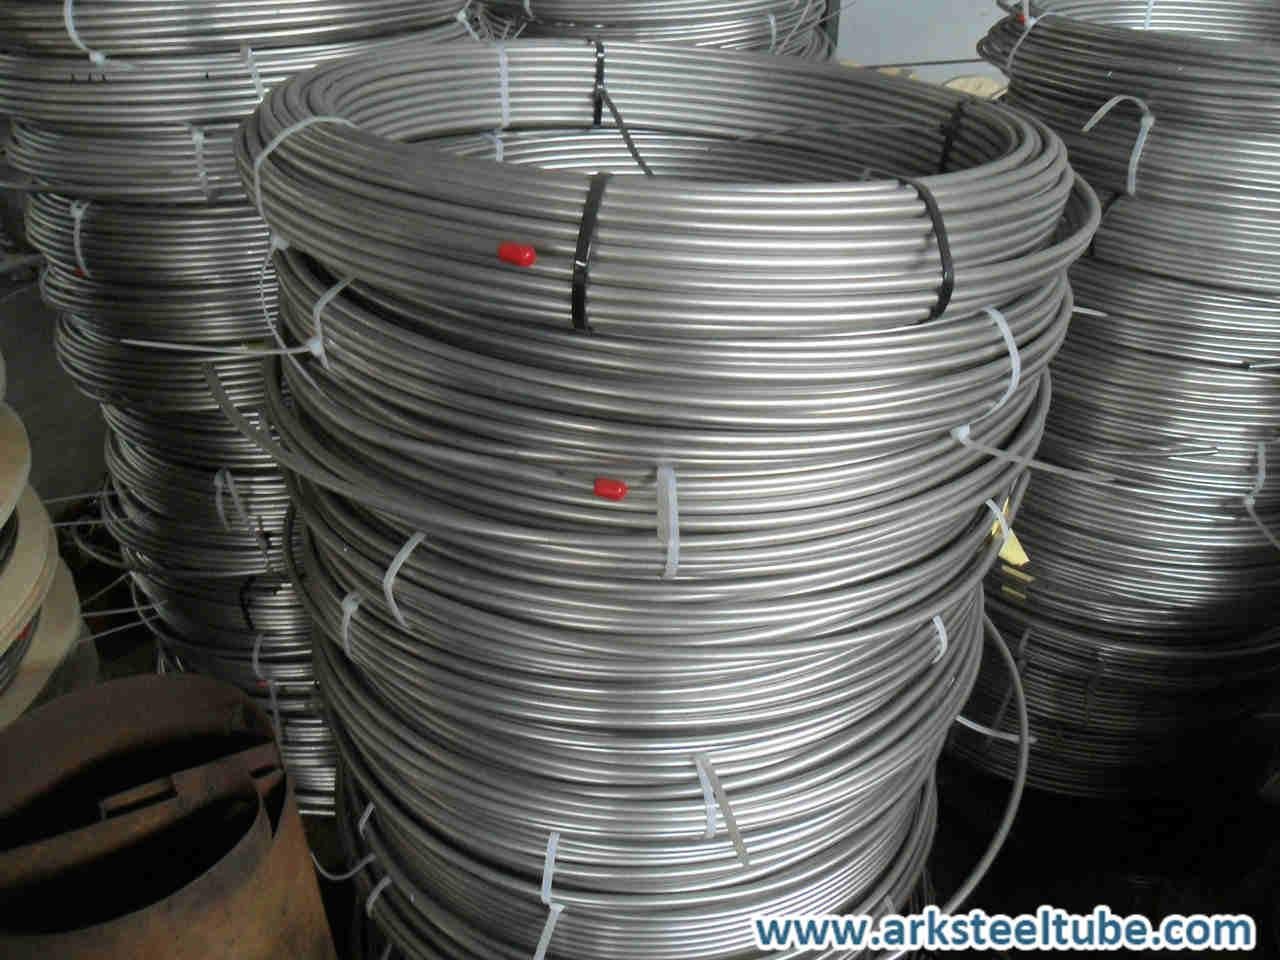 Stainless Steel Coil Tubing ASTM A269 TP304 TP304L TP316L TP321 Coiled Tube